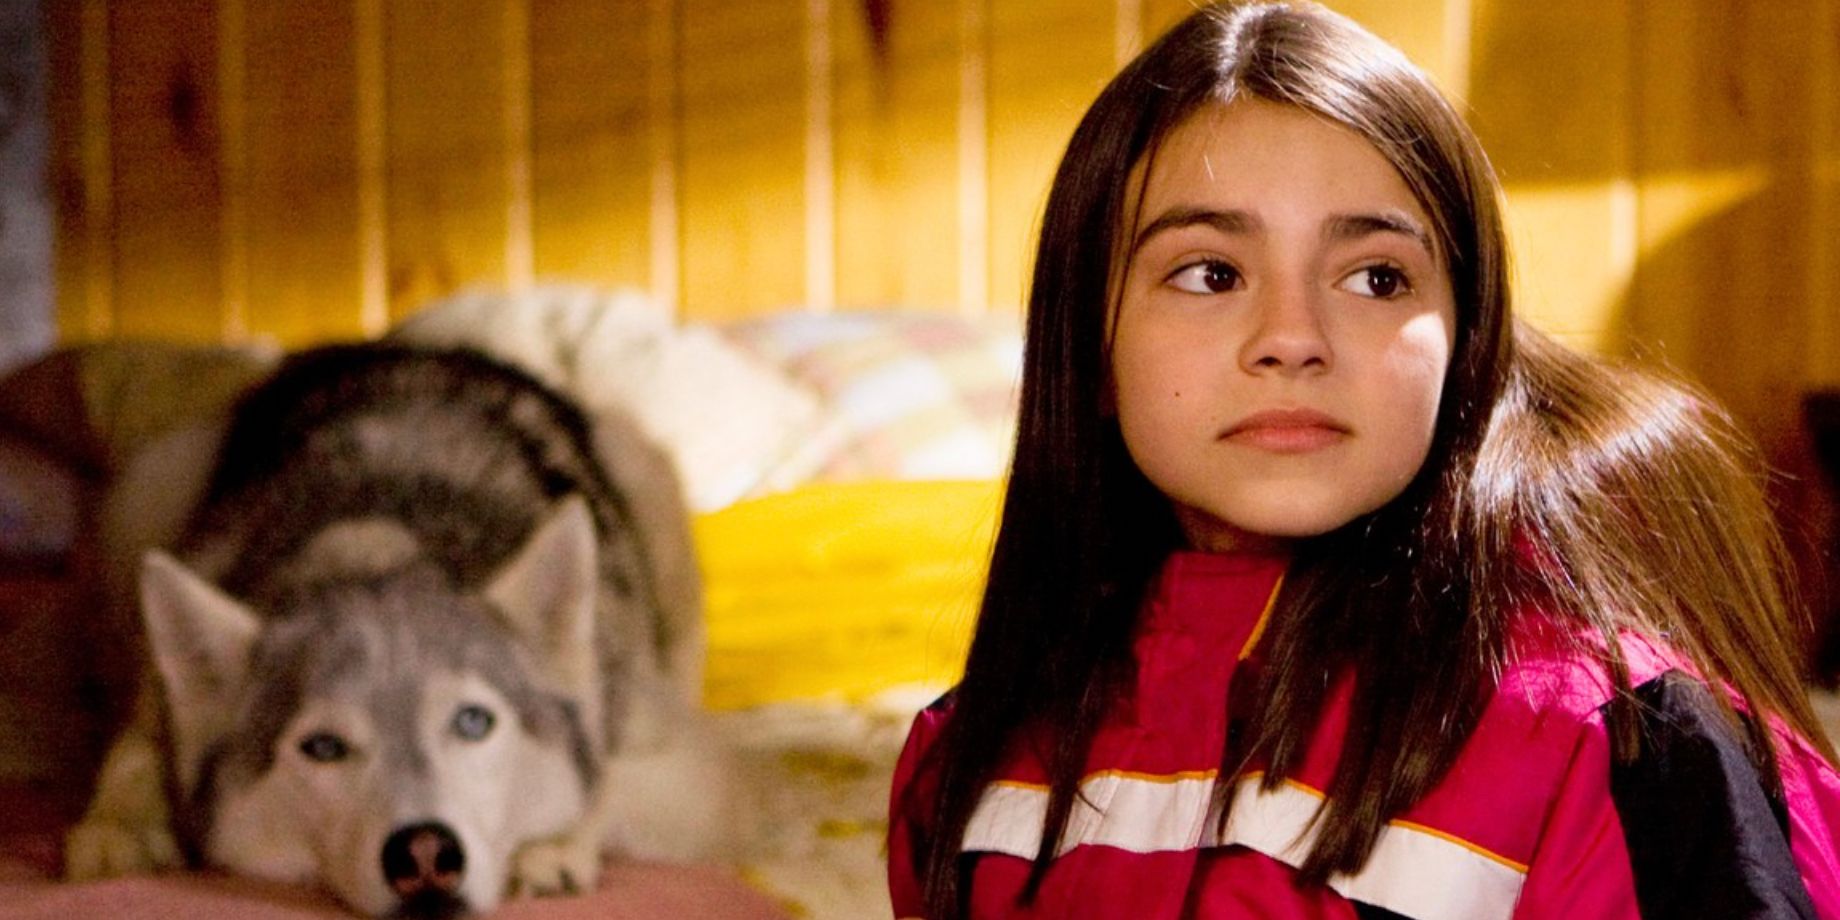 A young girl looks at something off screen while a dog lays down behind her in Call of the Wild